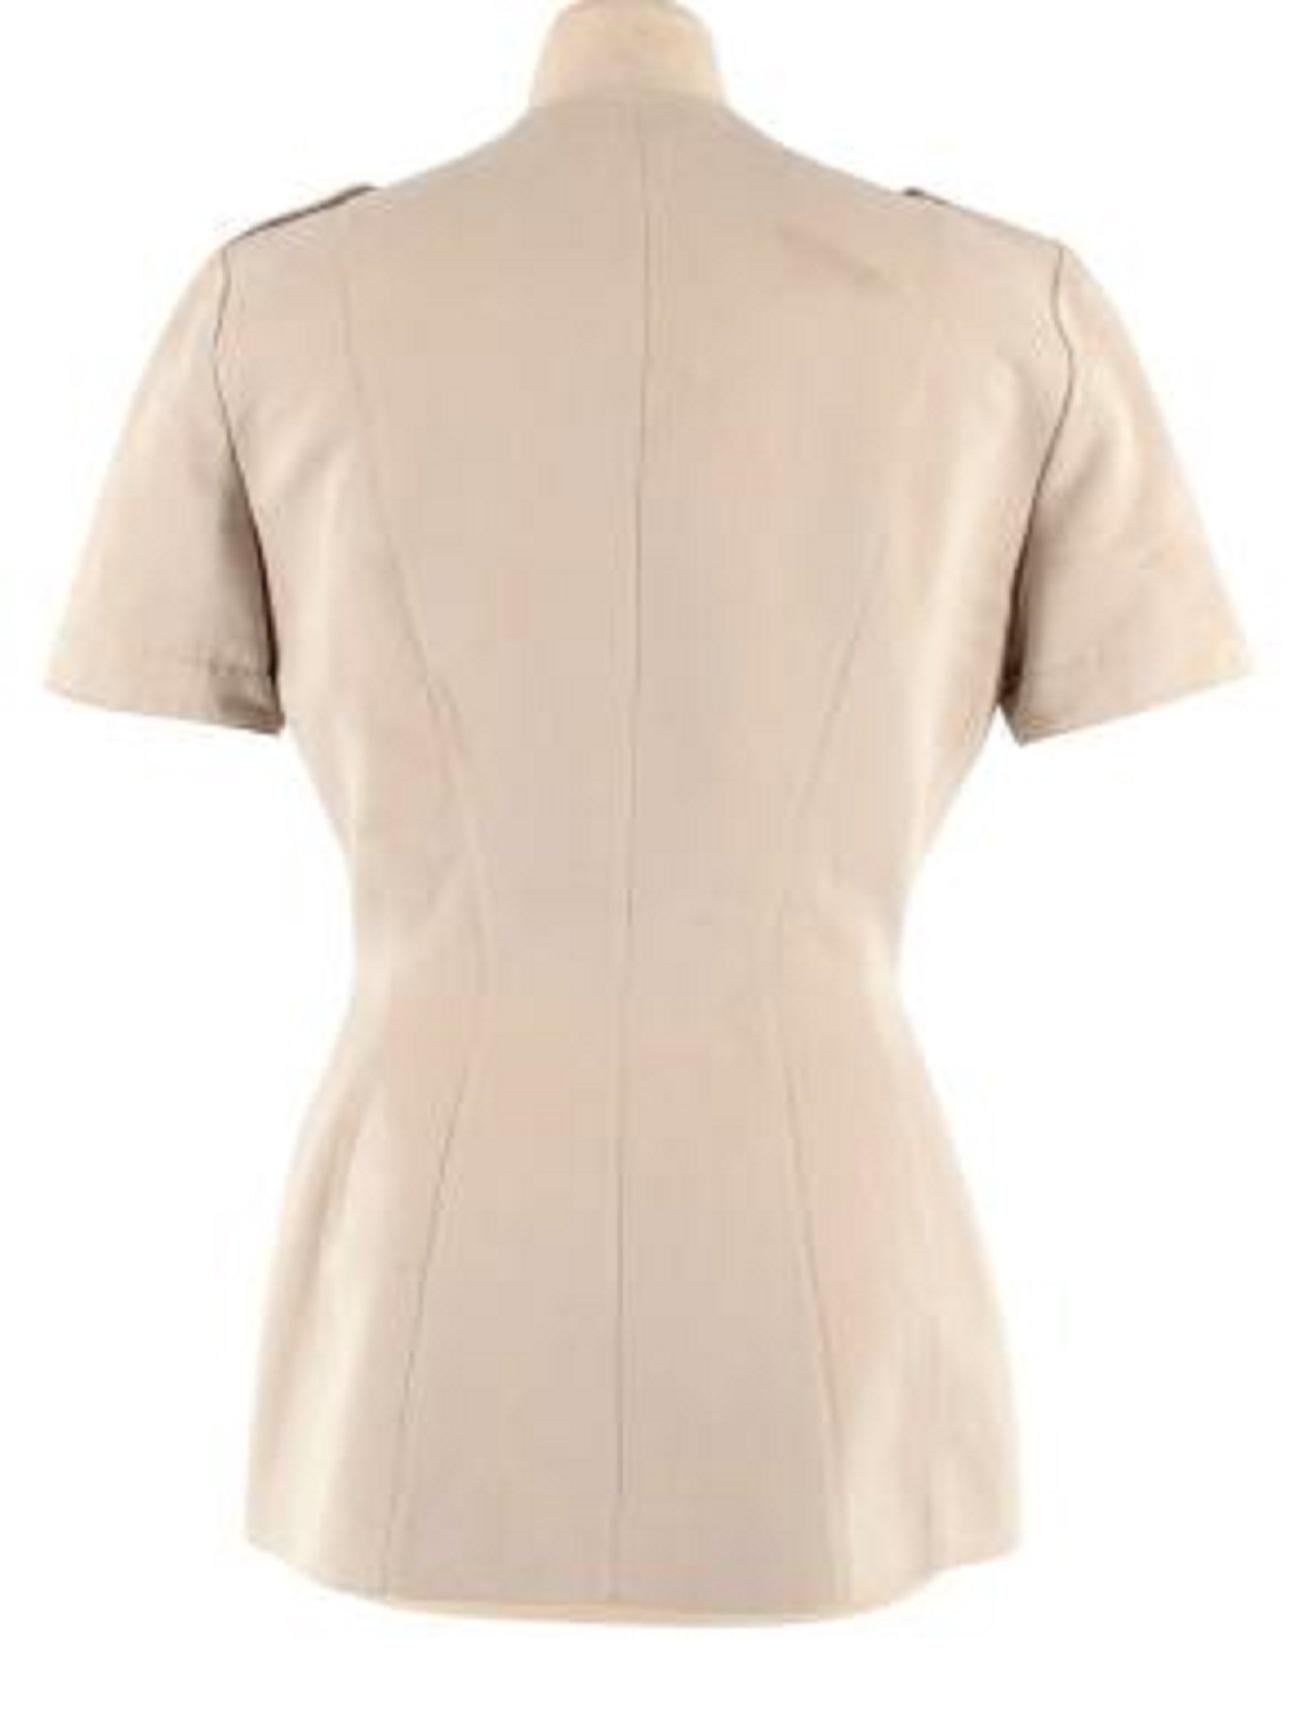 Mugler Cream Suede Safari Style Jacket

-Silver tone hardware 
-Multi pockets, Two flap press stud at the chest & two zip pockets at the chest 
-Zip fastening along the front 
-Slim fit 
-Fully lined 
-V-neckline 
-Belt closure at the waist